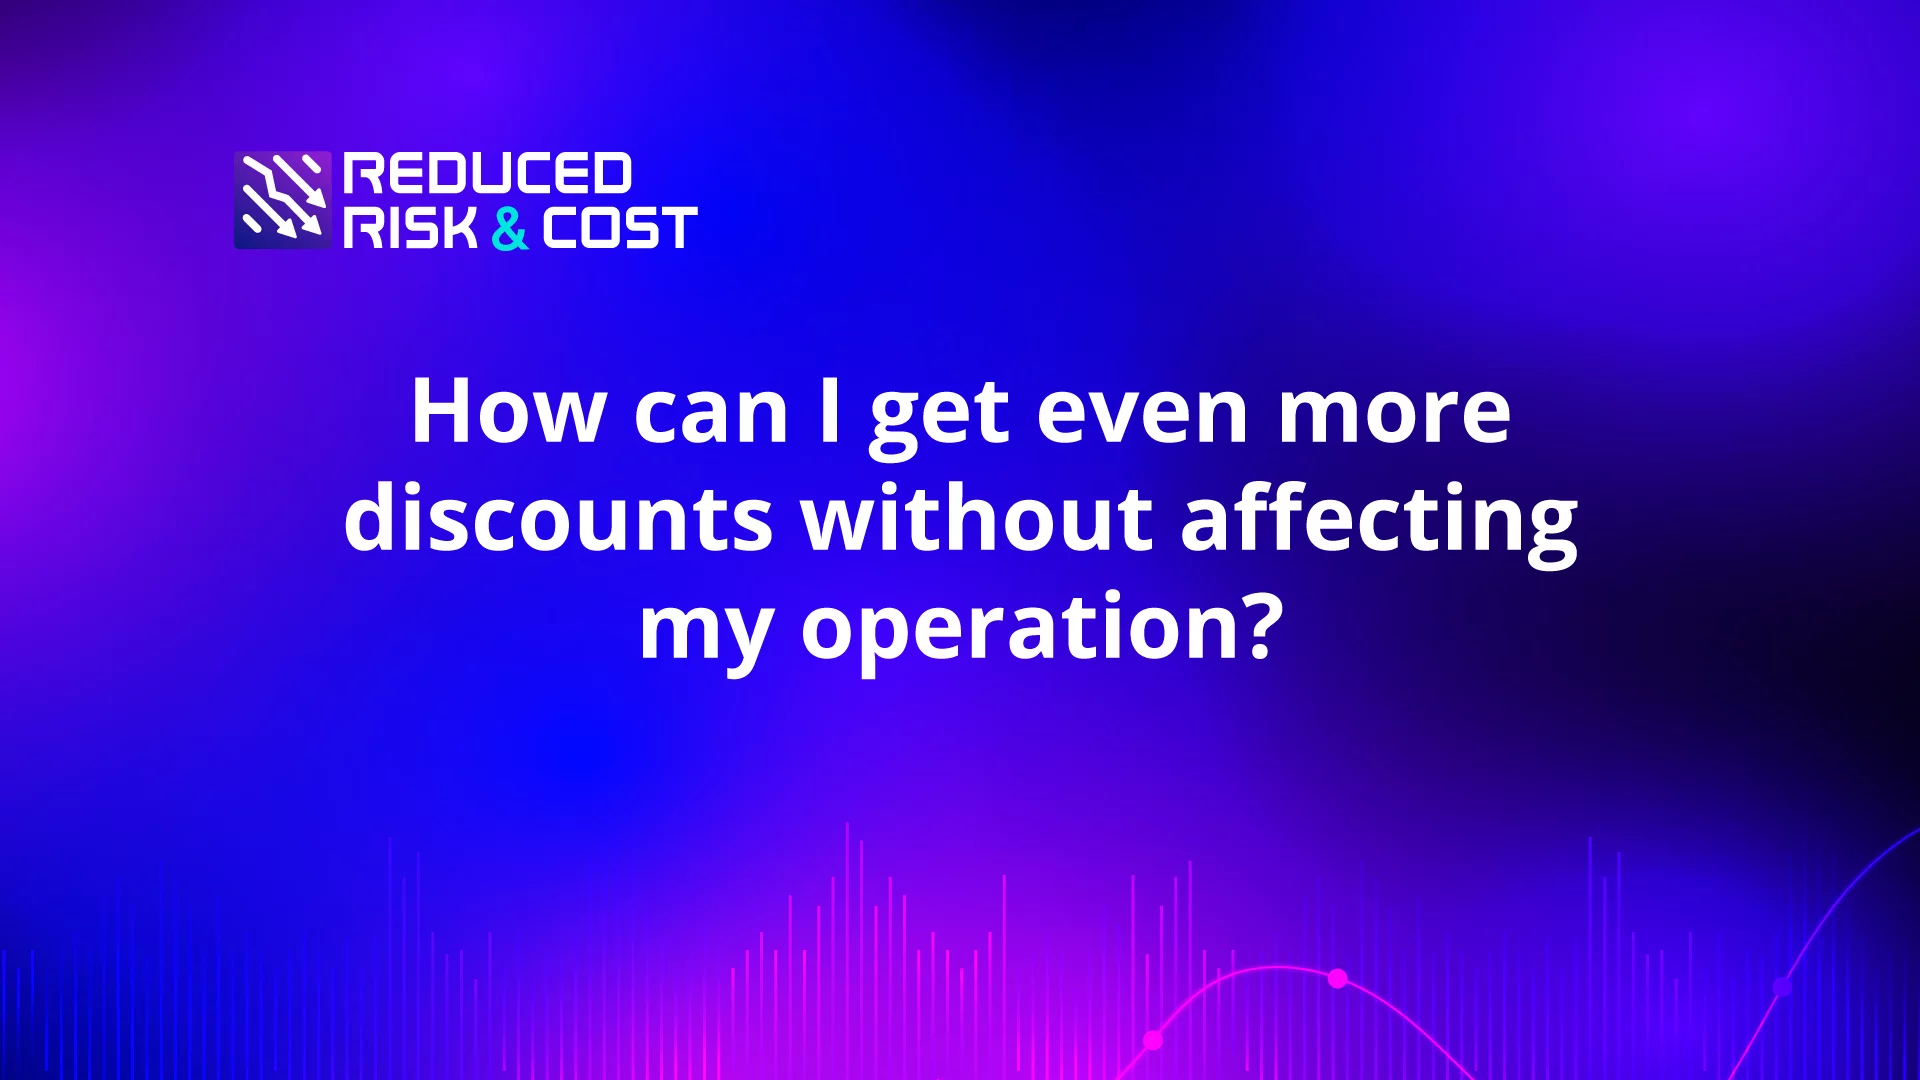 How can I get even more discounts without affecting my operation?